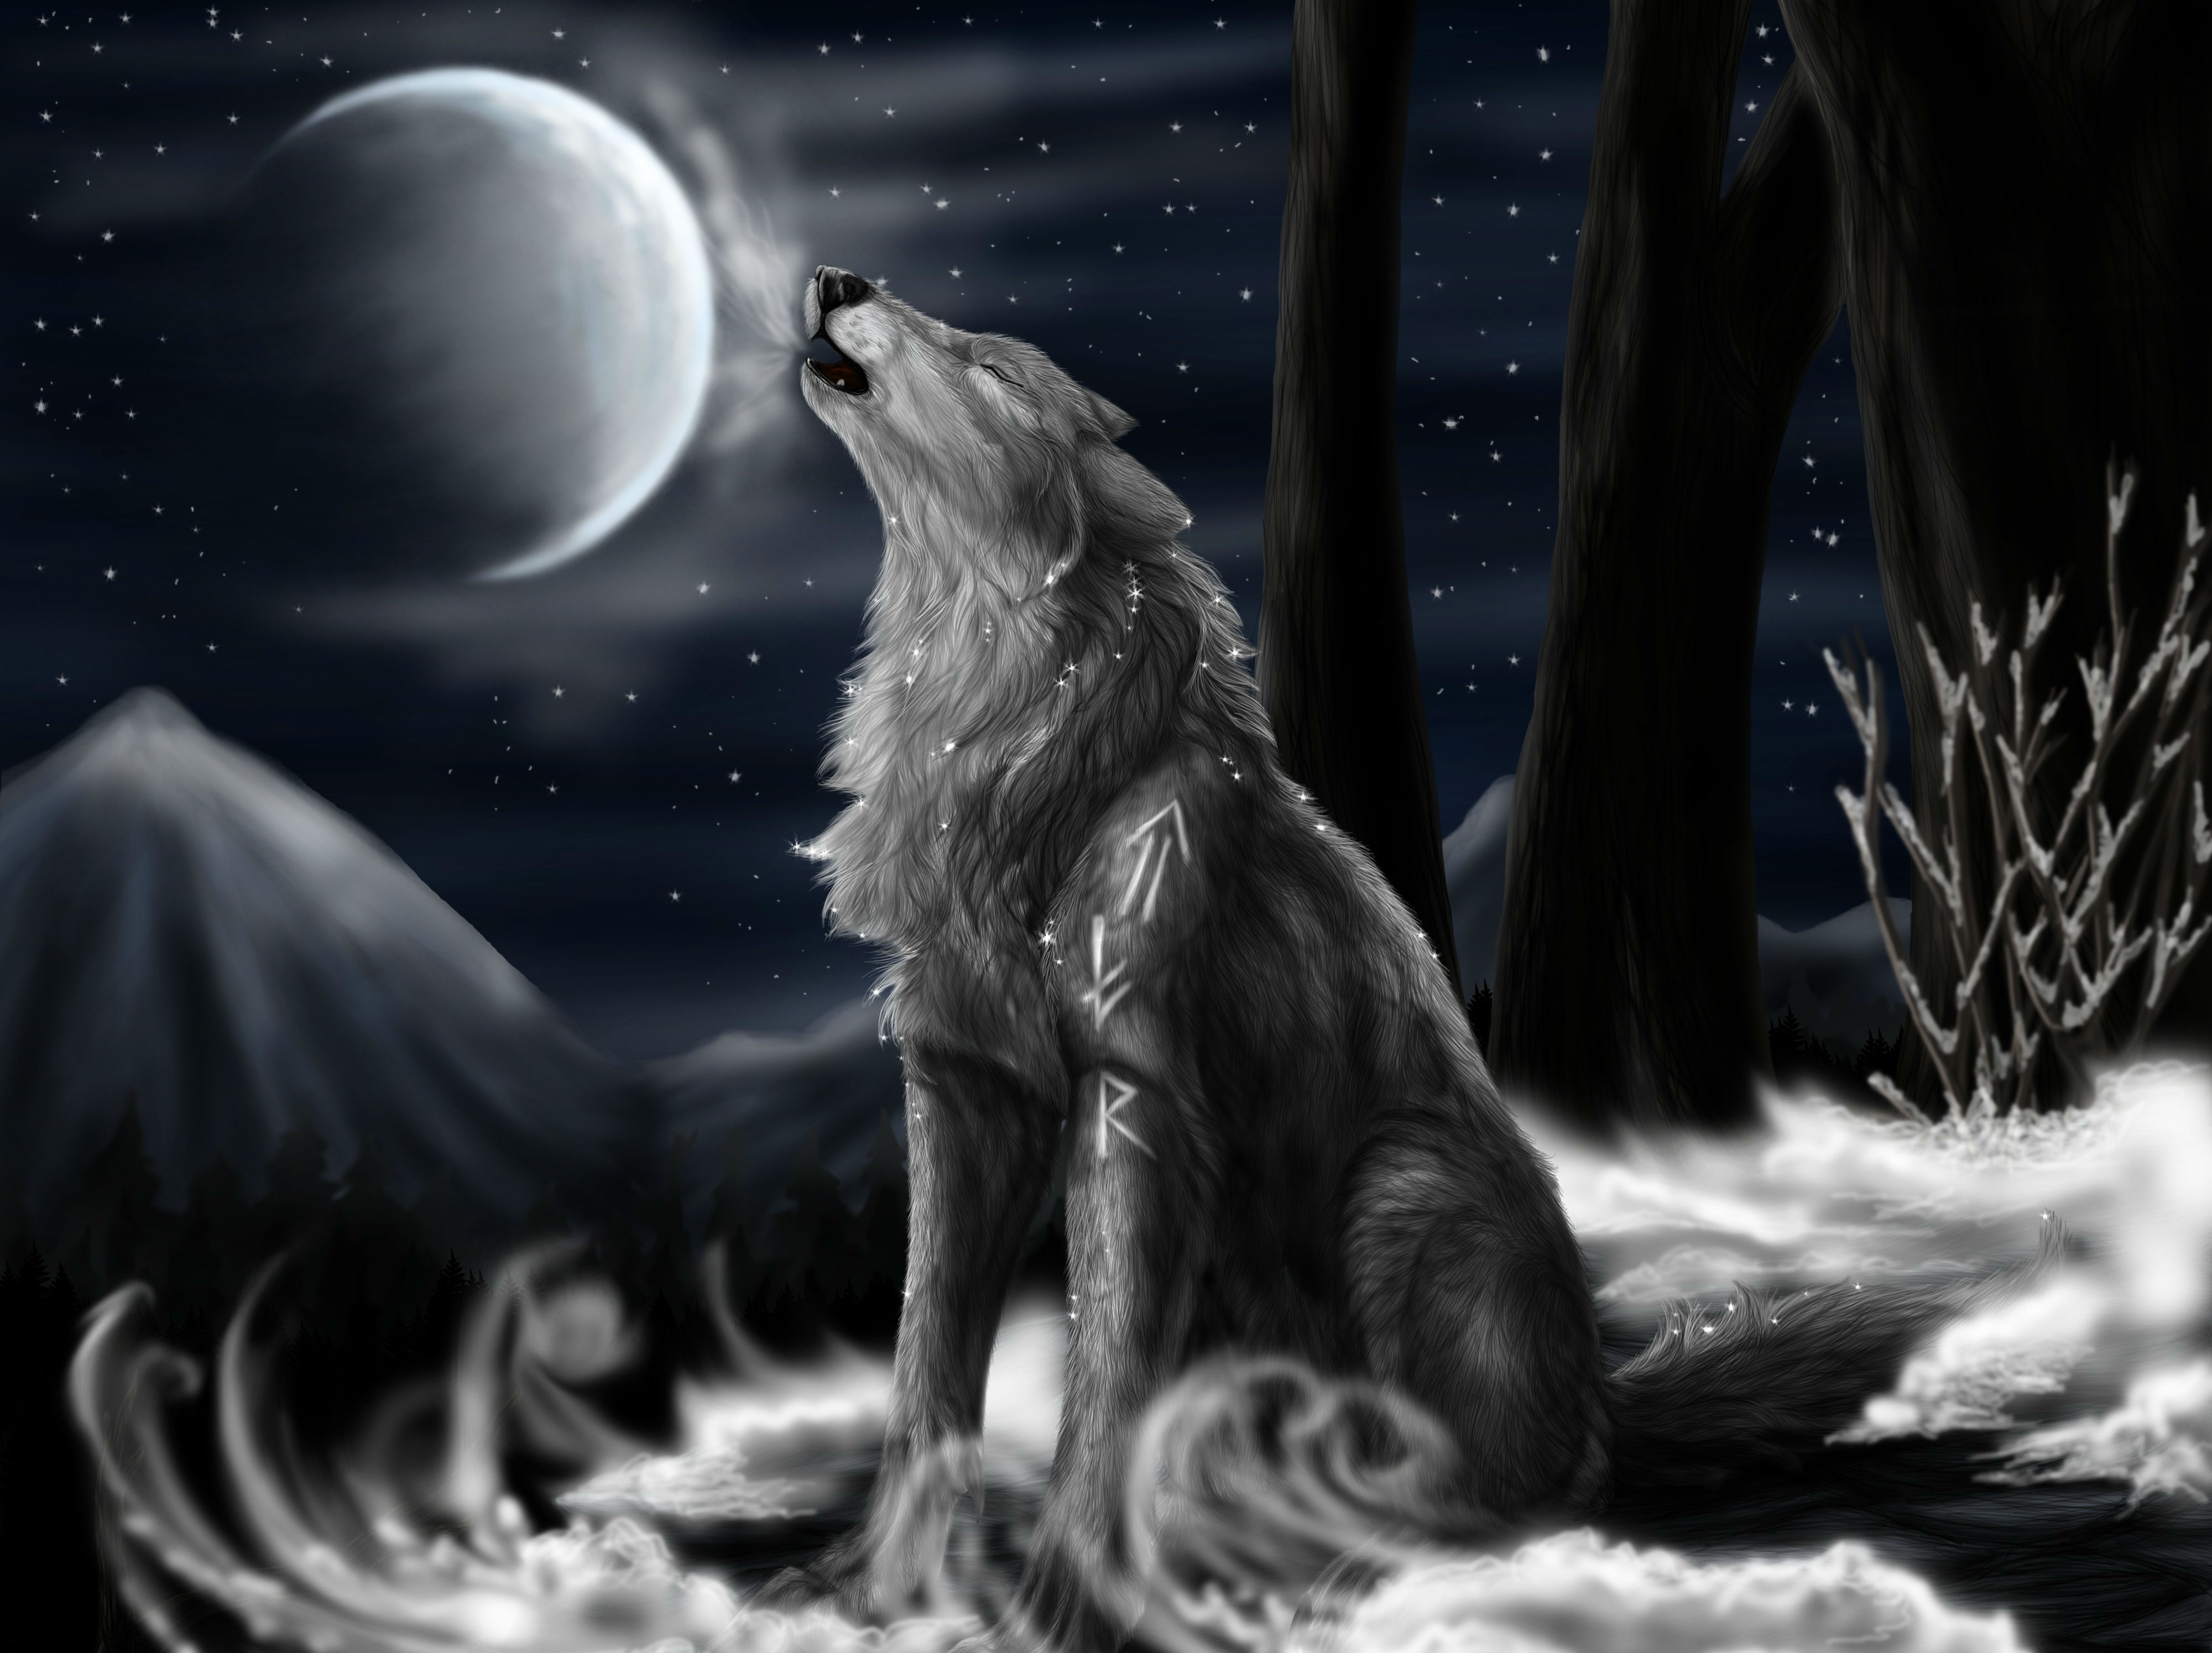 Wolf Backgrounds Free Download Wallpapers, Backgrounds, Images